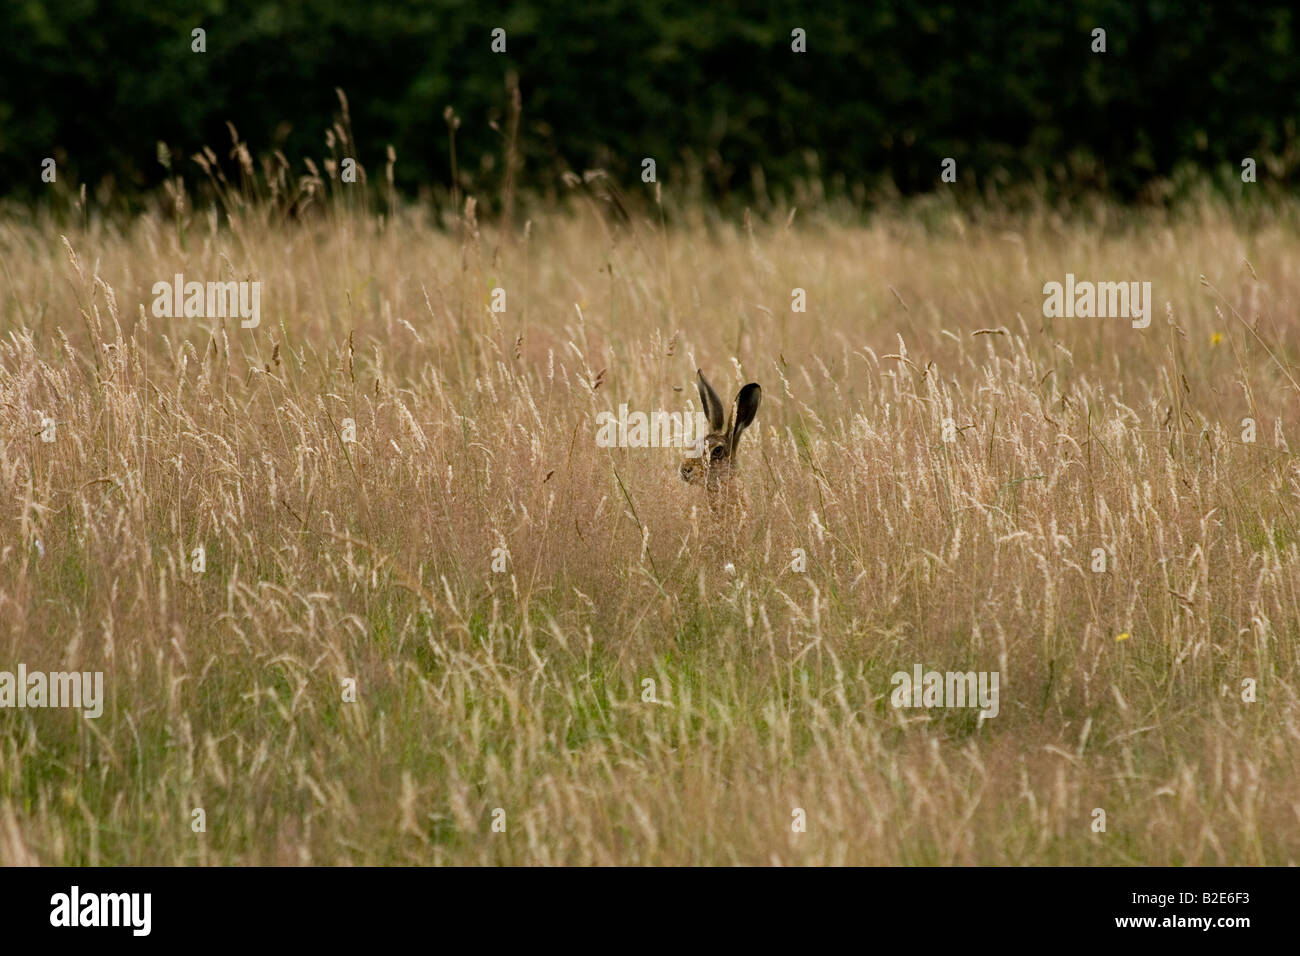 A hare hidding in the grass Stock Photo